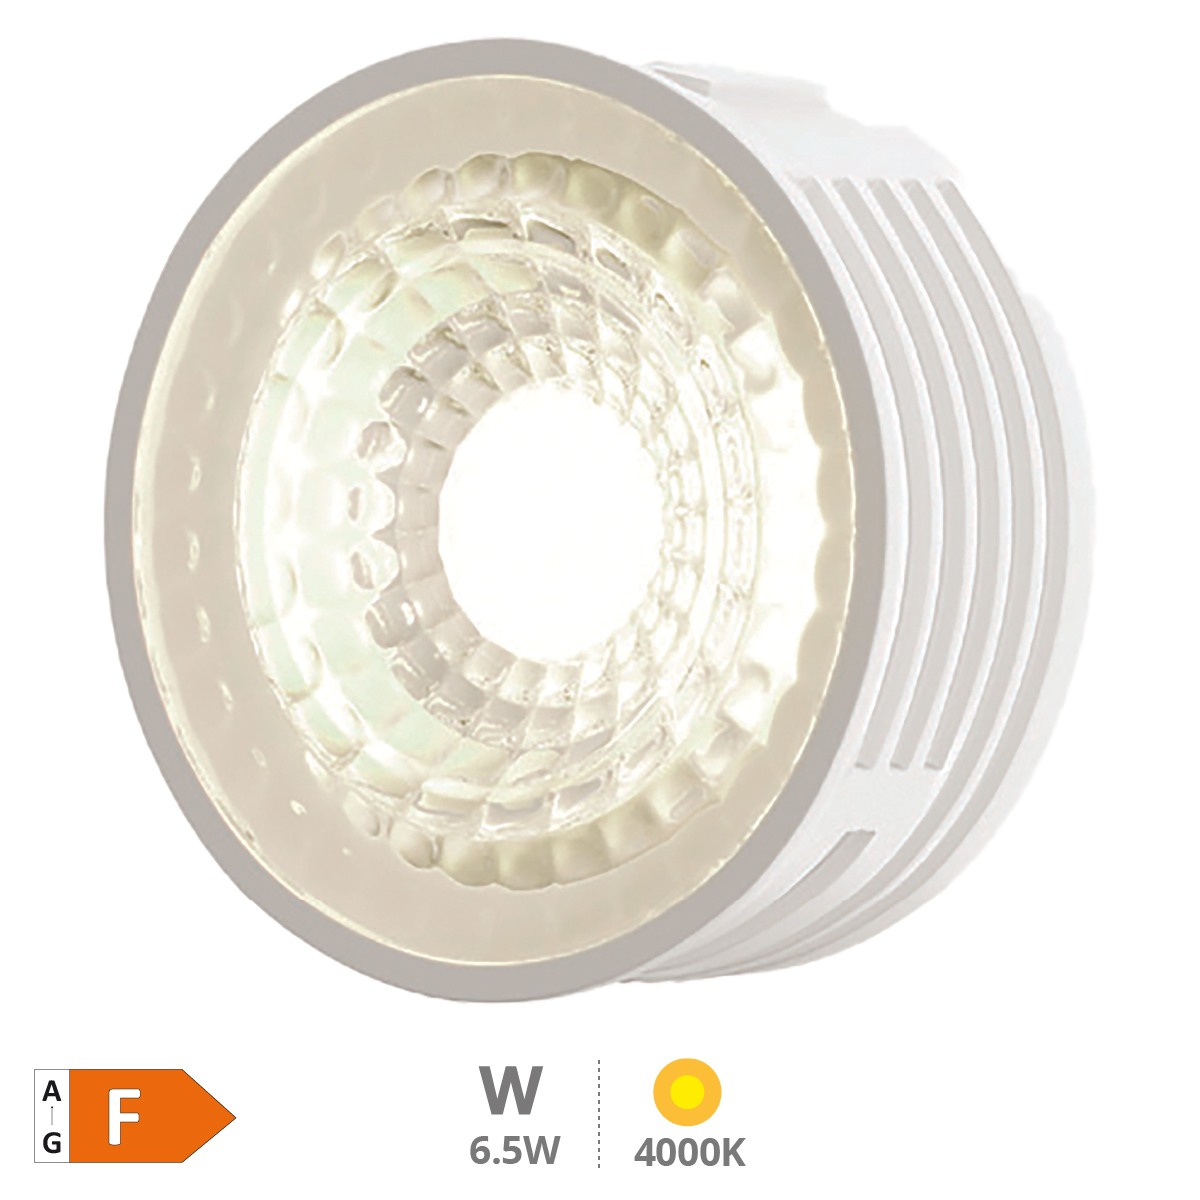 Serie Lubia LED module for recessed lighting fixtures 6,5W 60º 4000K